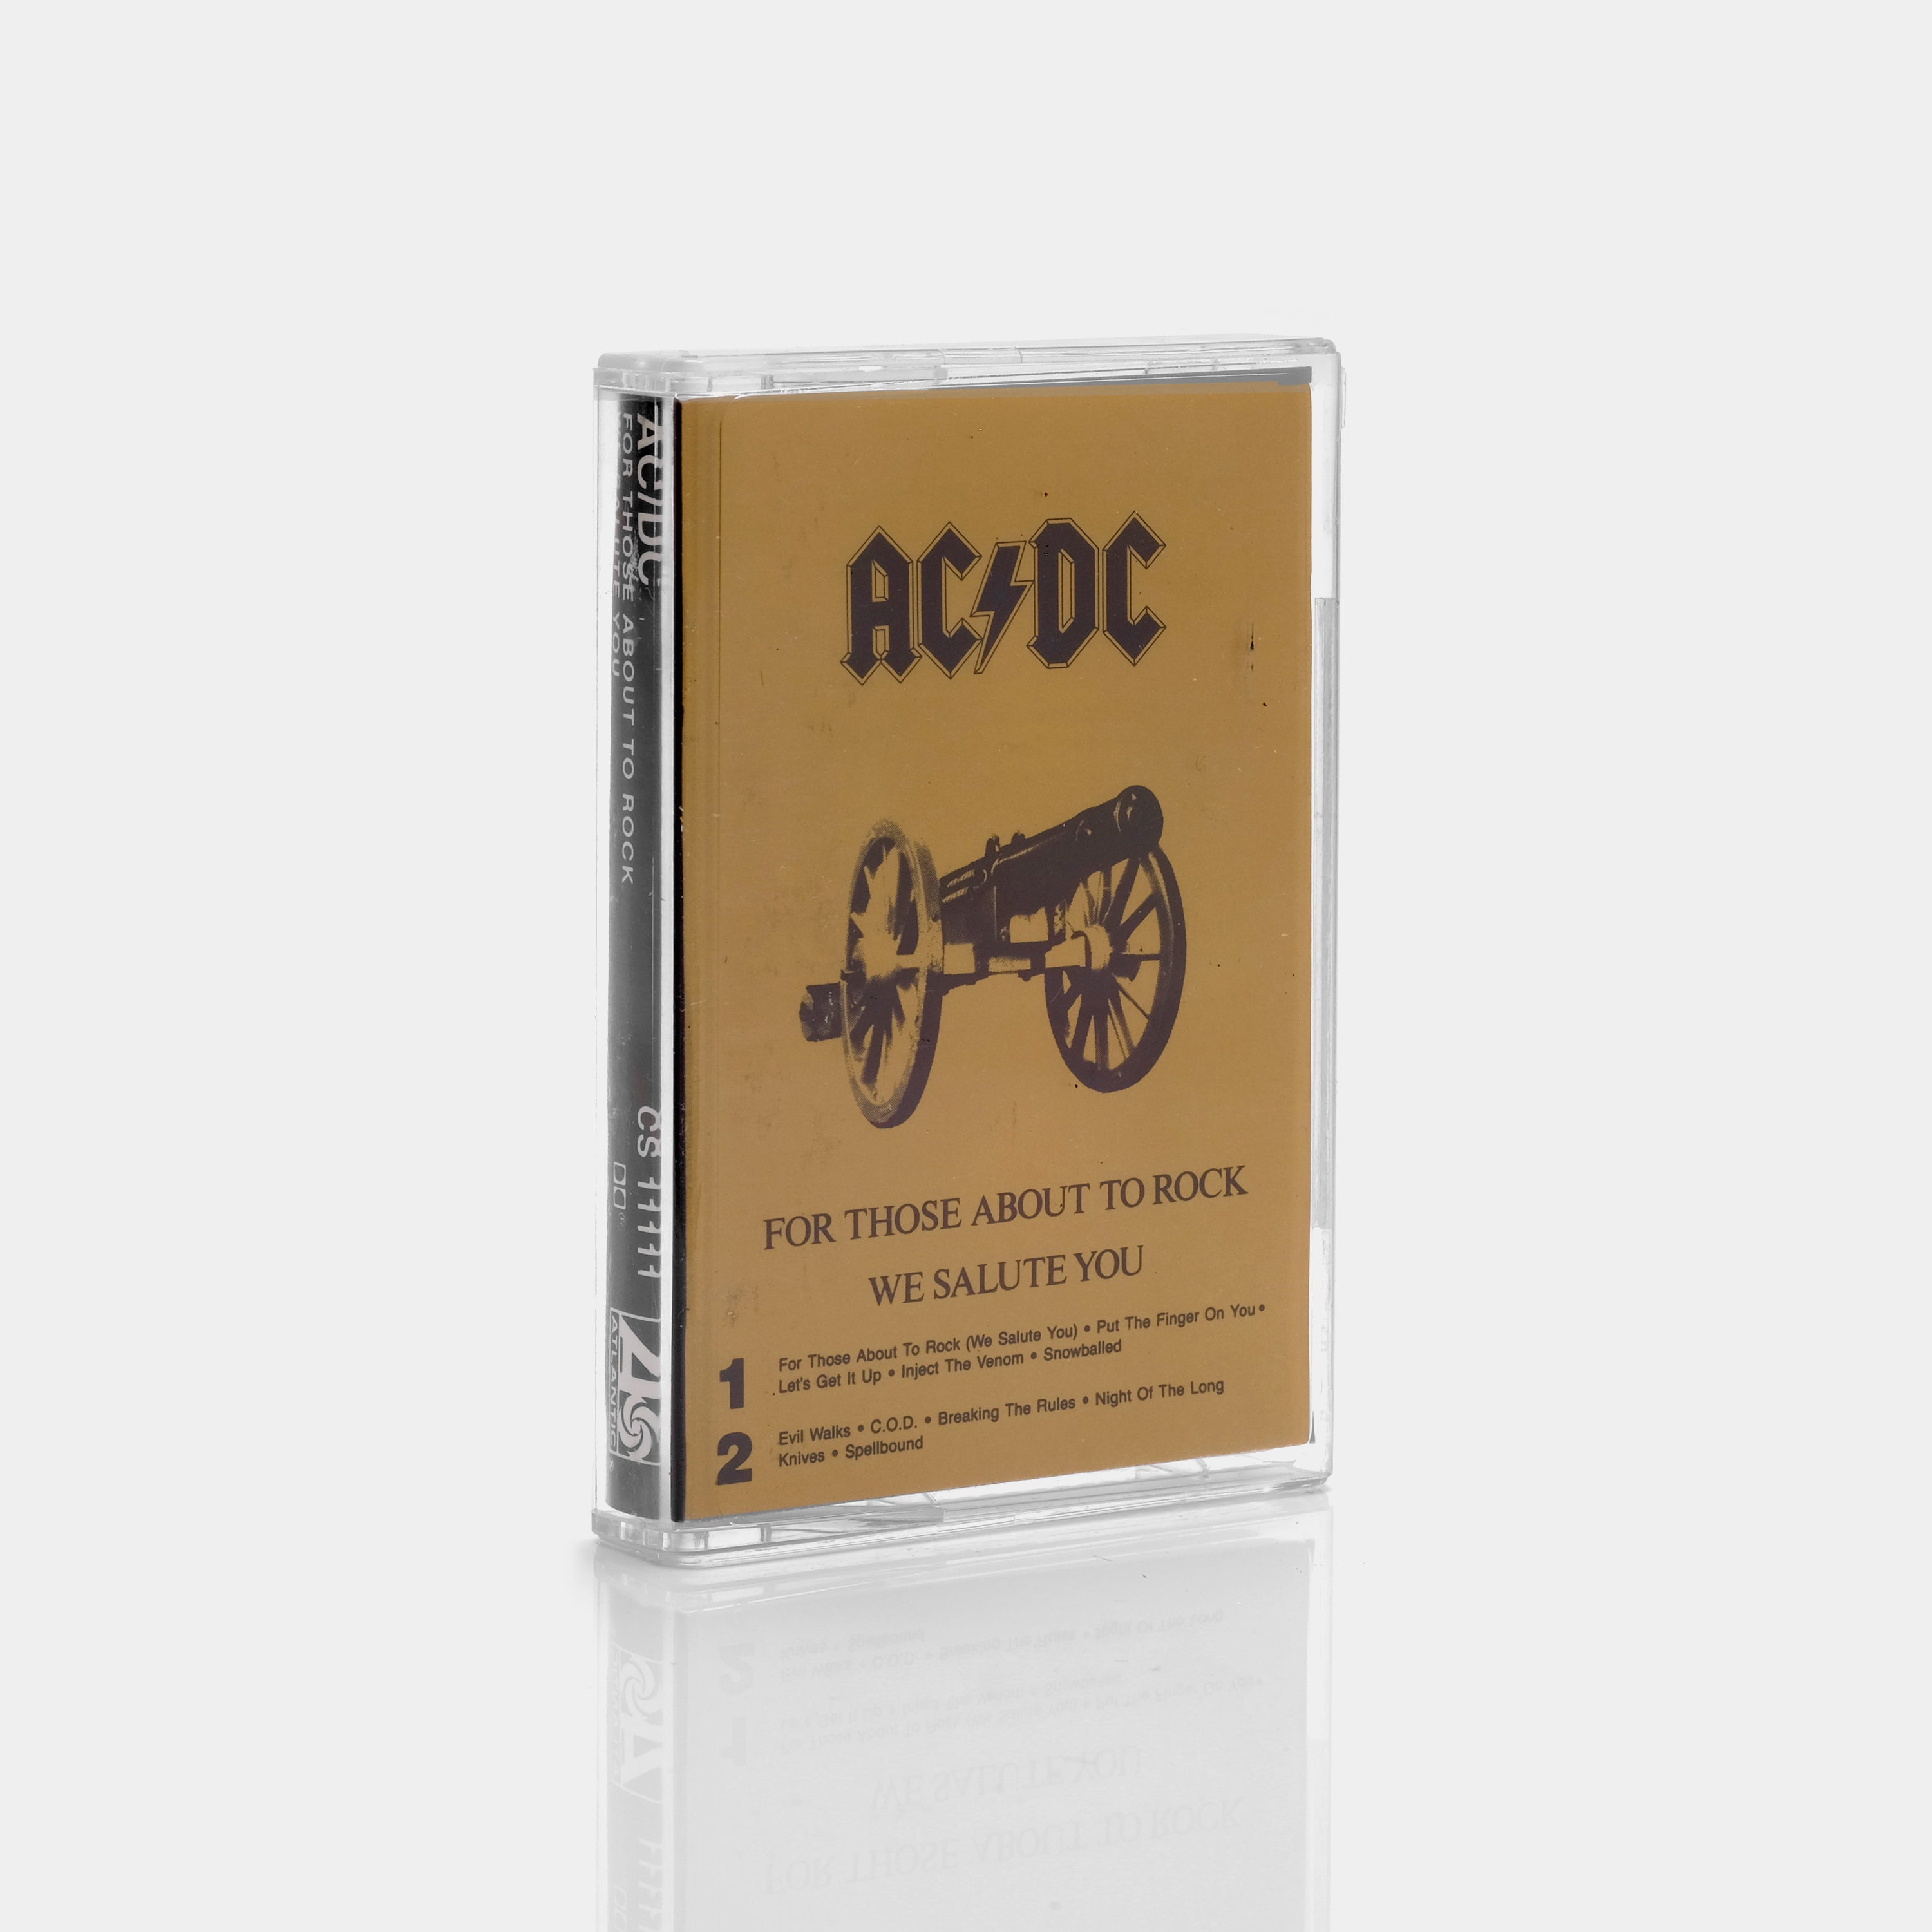 AC/DC - For Those About To Rock (We Salute You) Cassette Tape